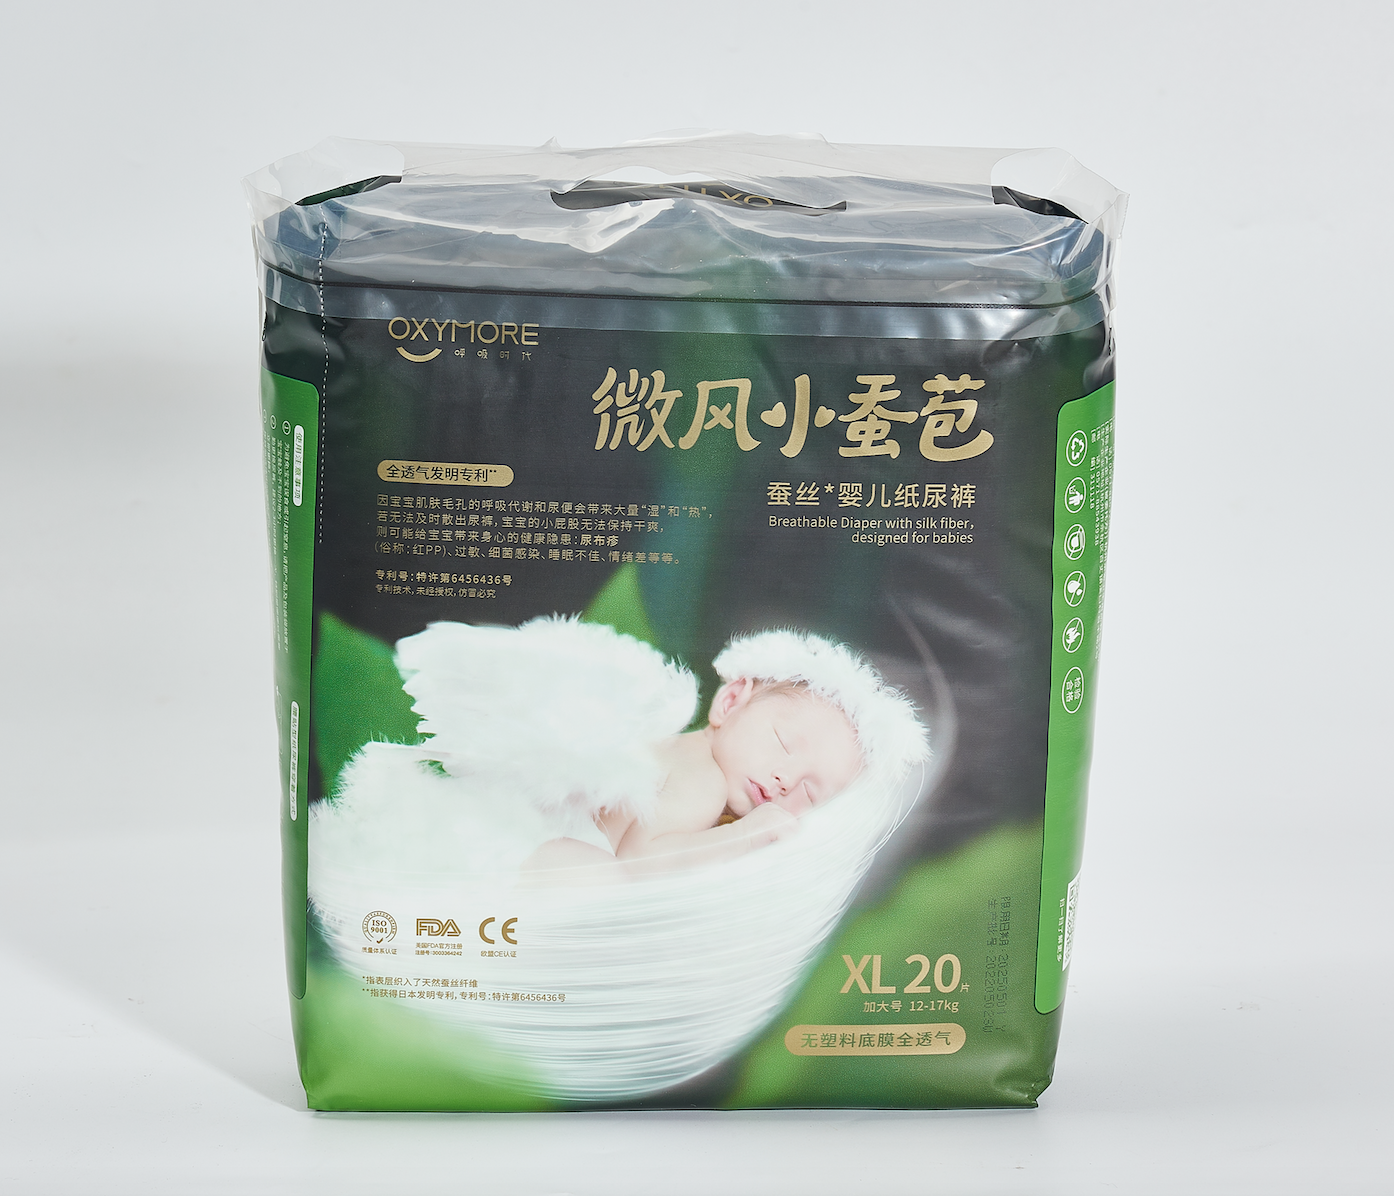 OXYMORE full breathable silky Baby Diapers